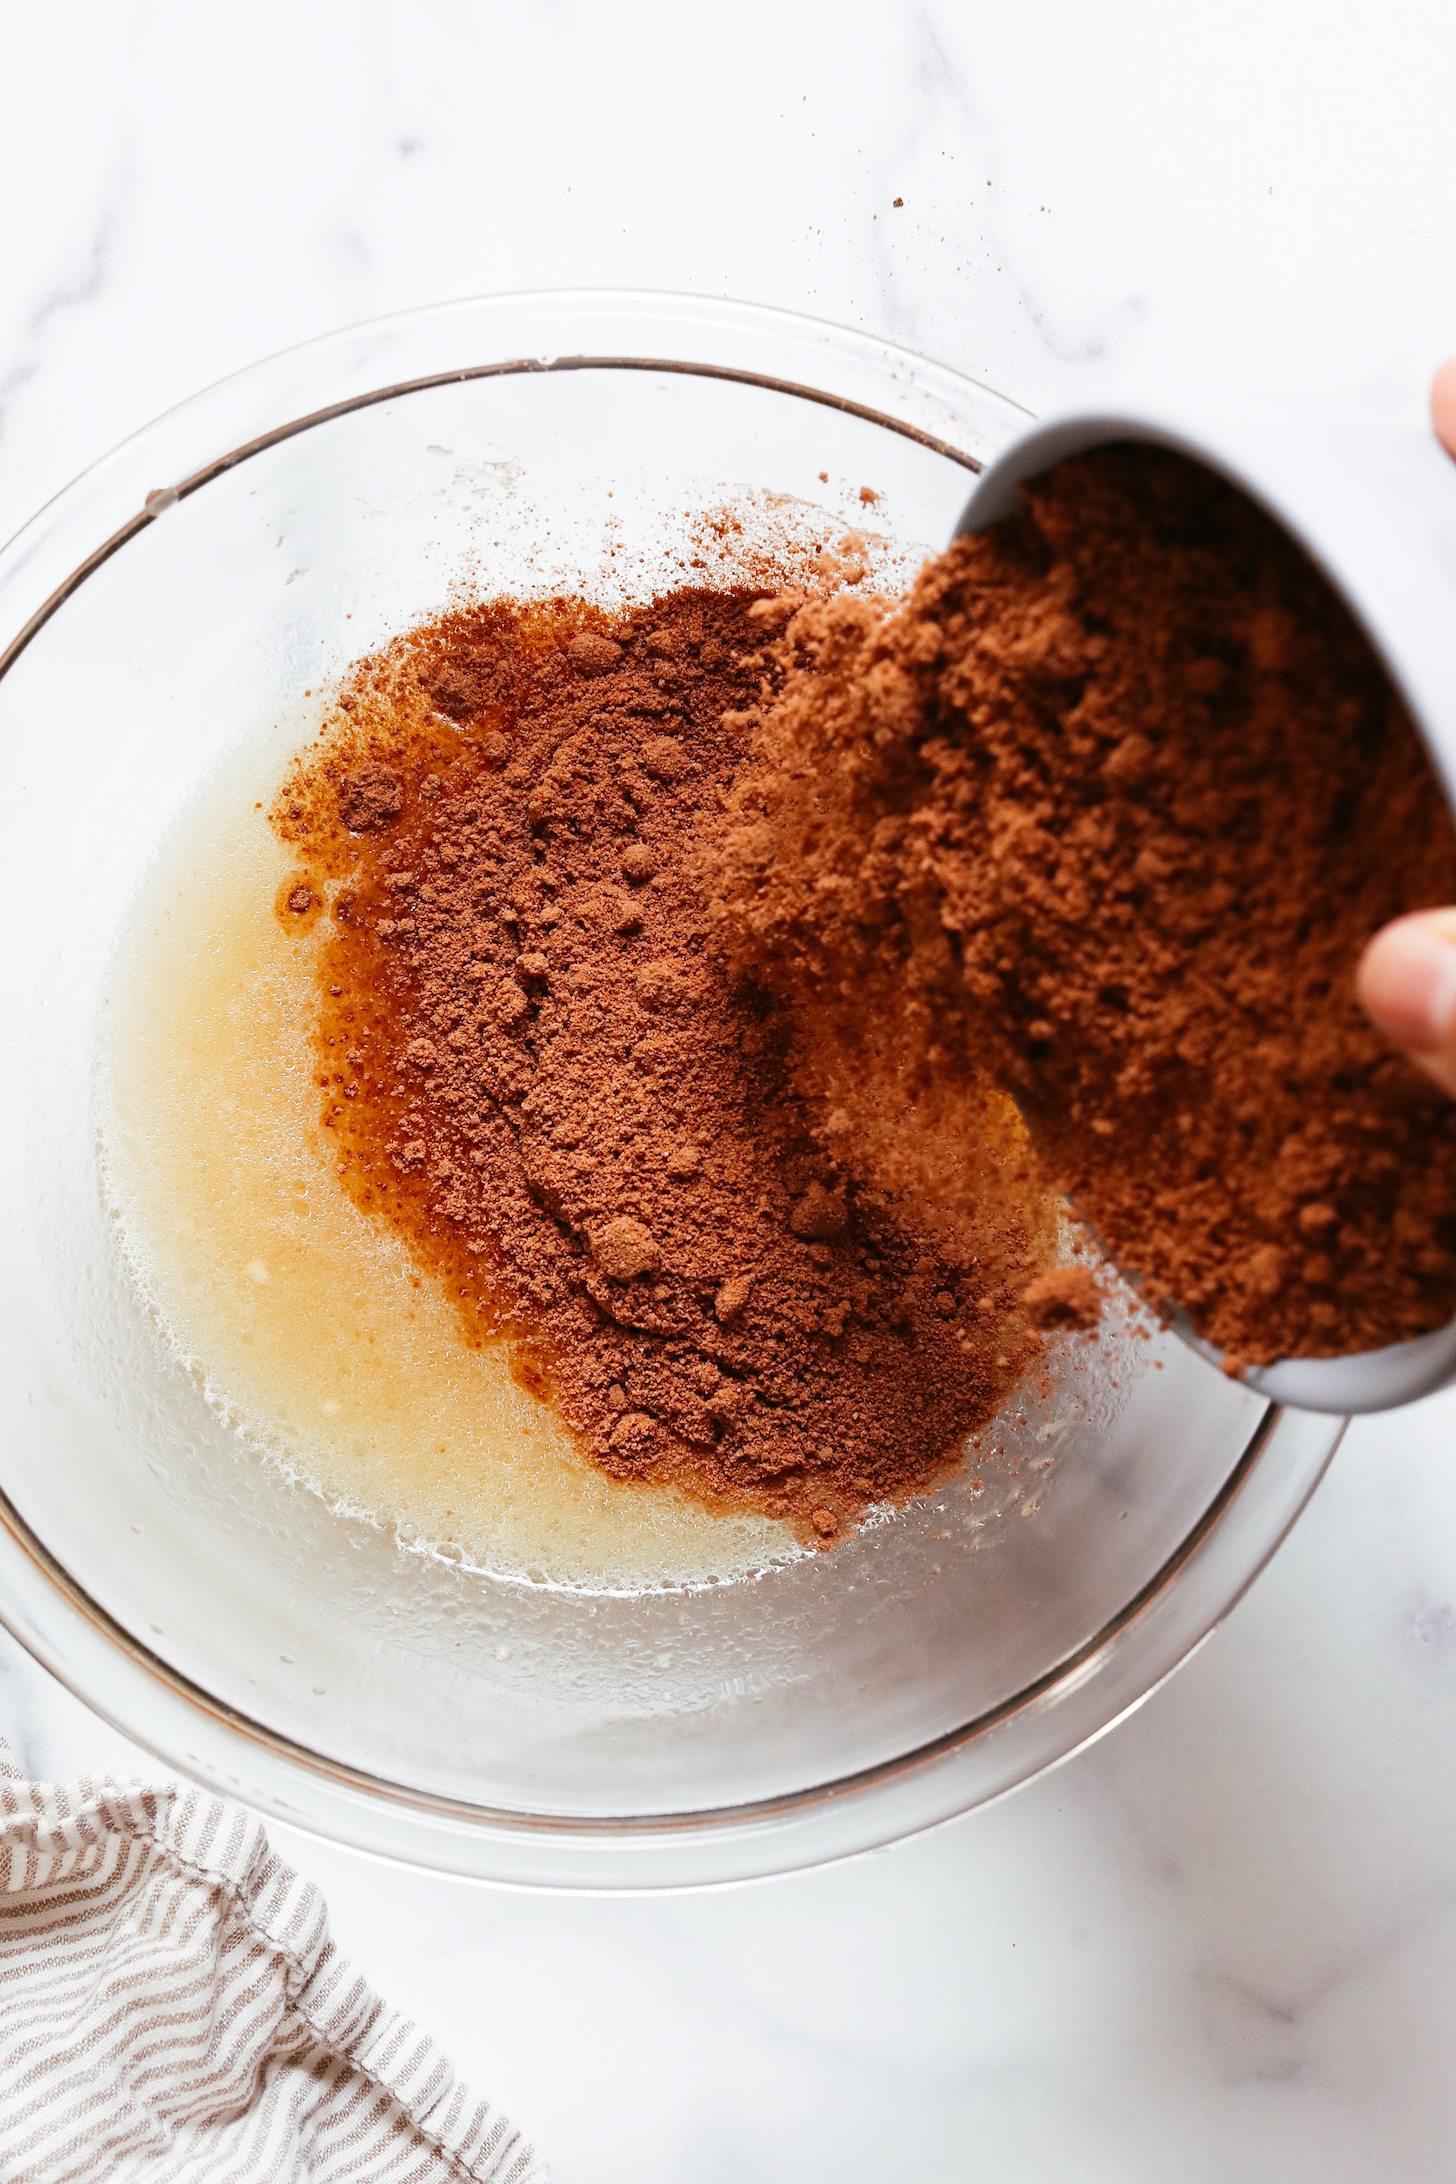 Pour the chocolate cake mix over the wet ingredients